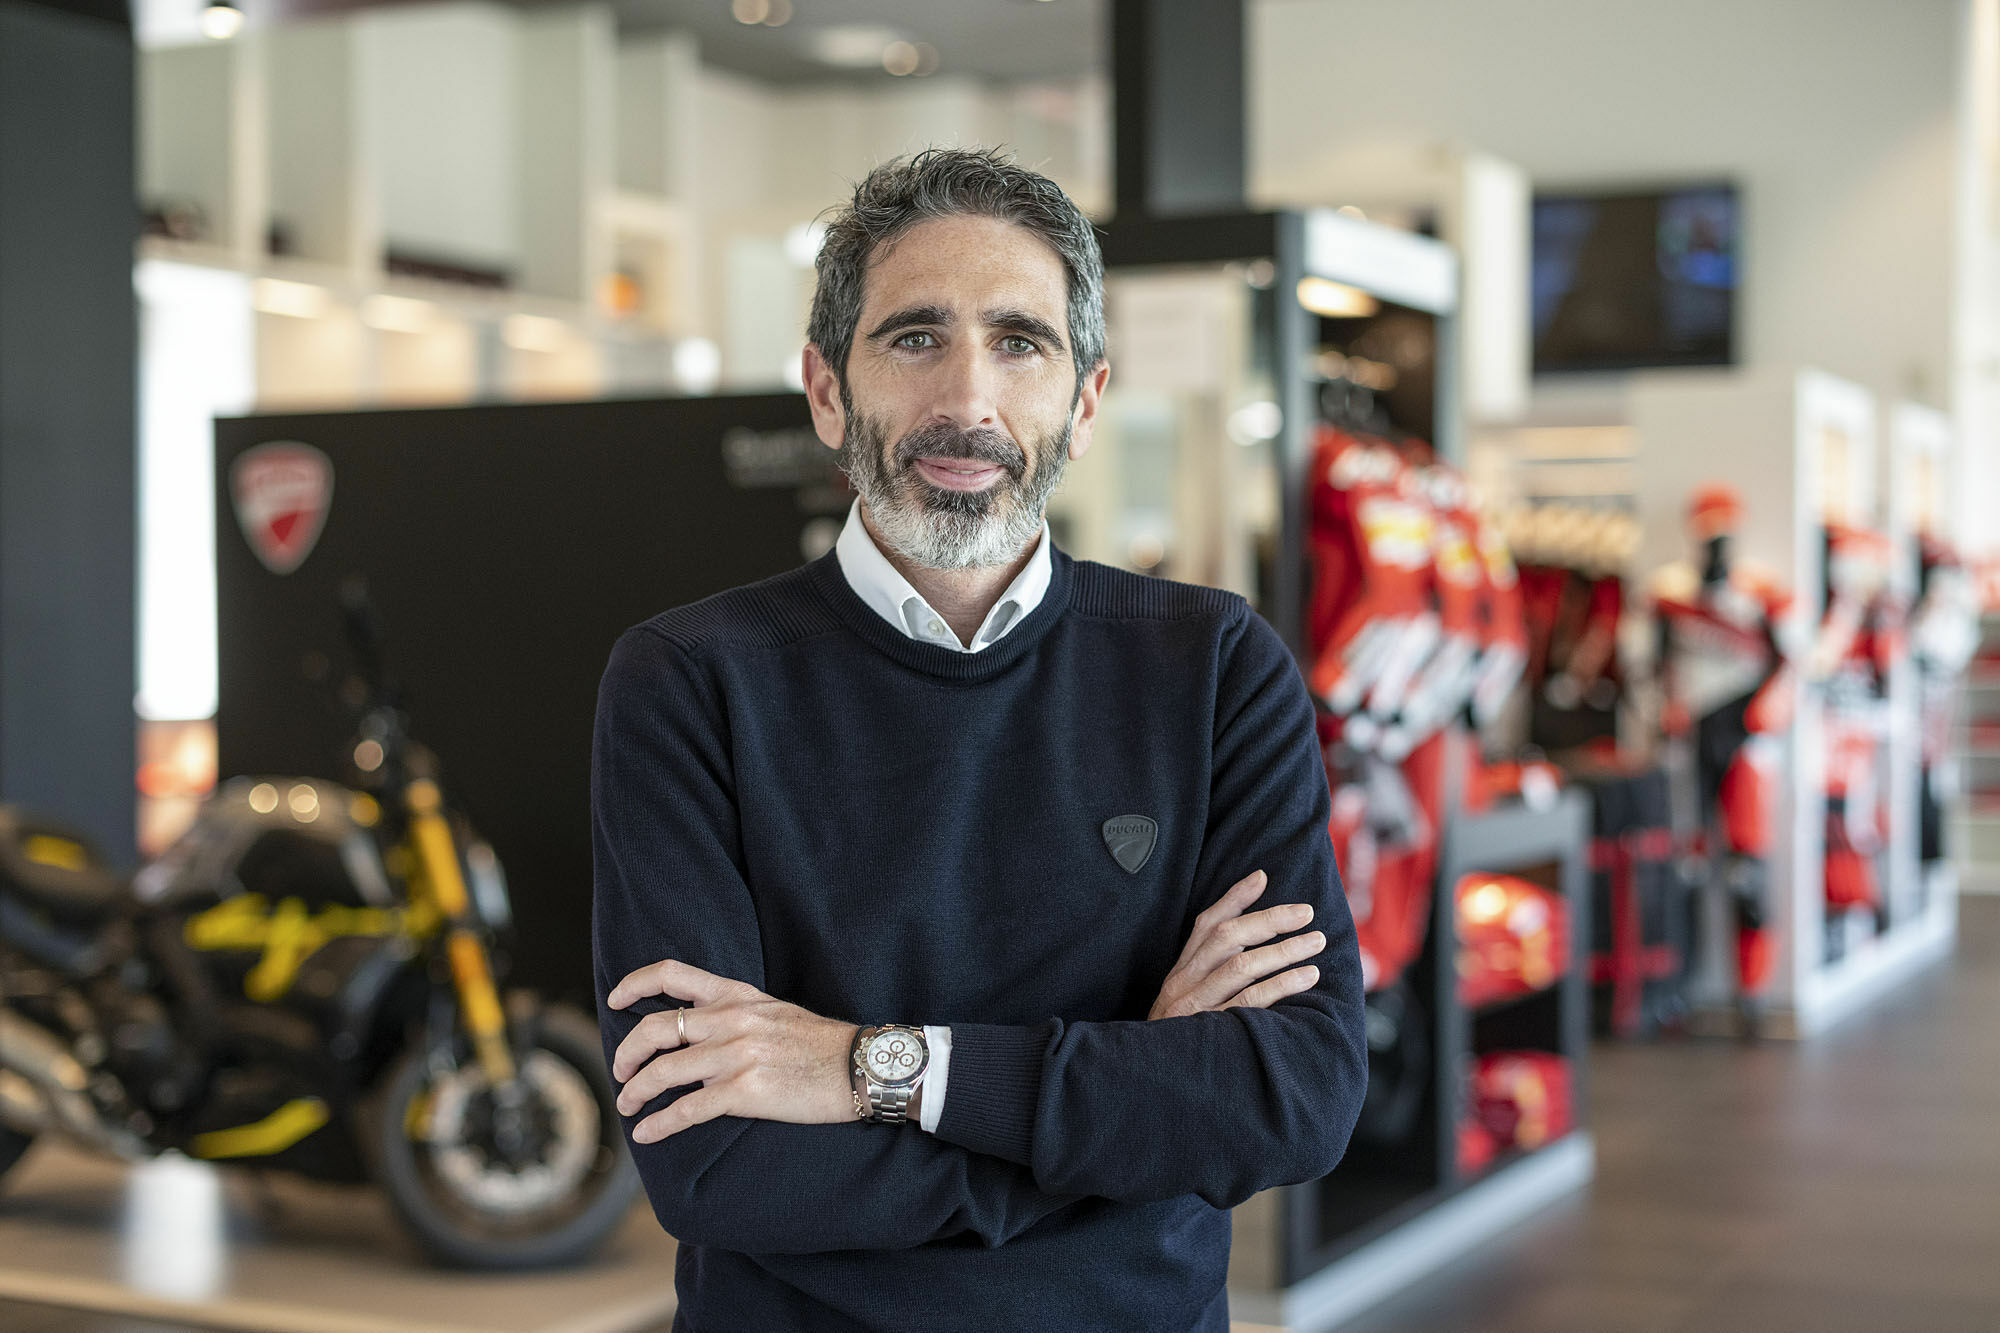 Ducati stabilizes its position in the main markets